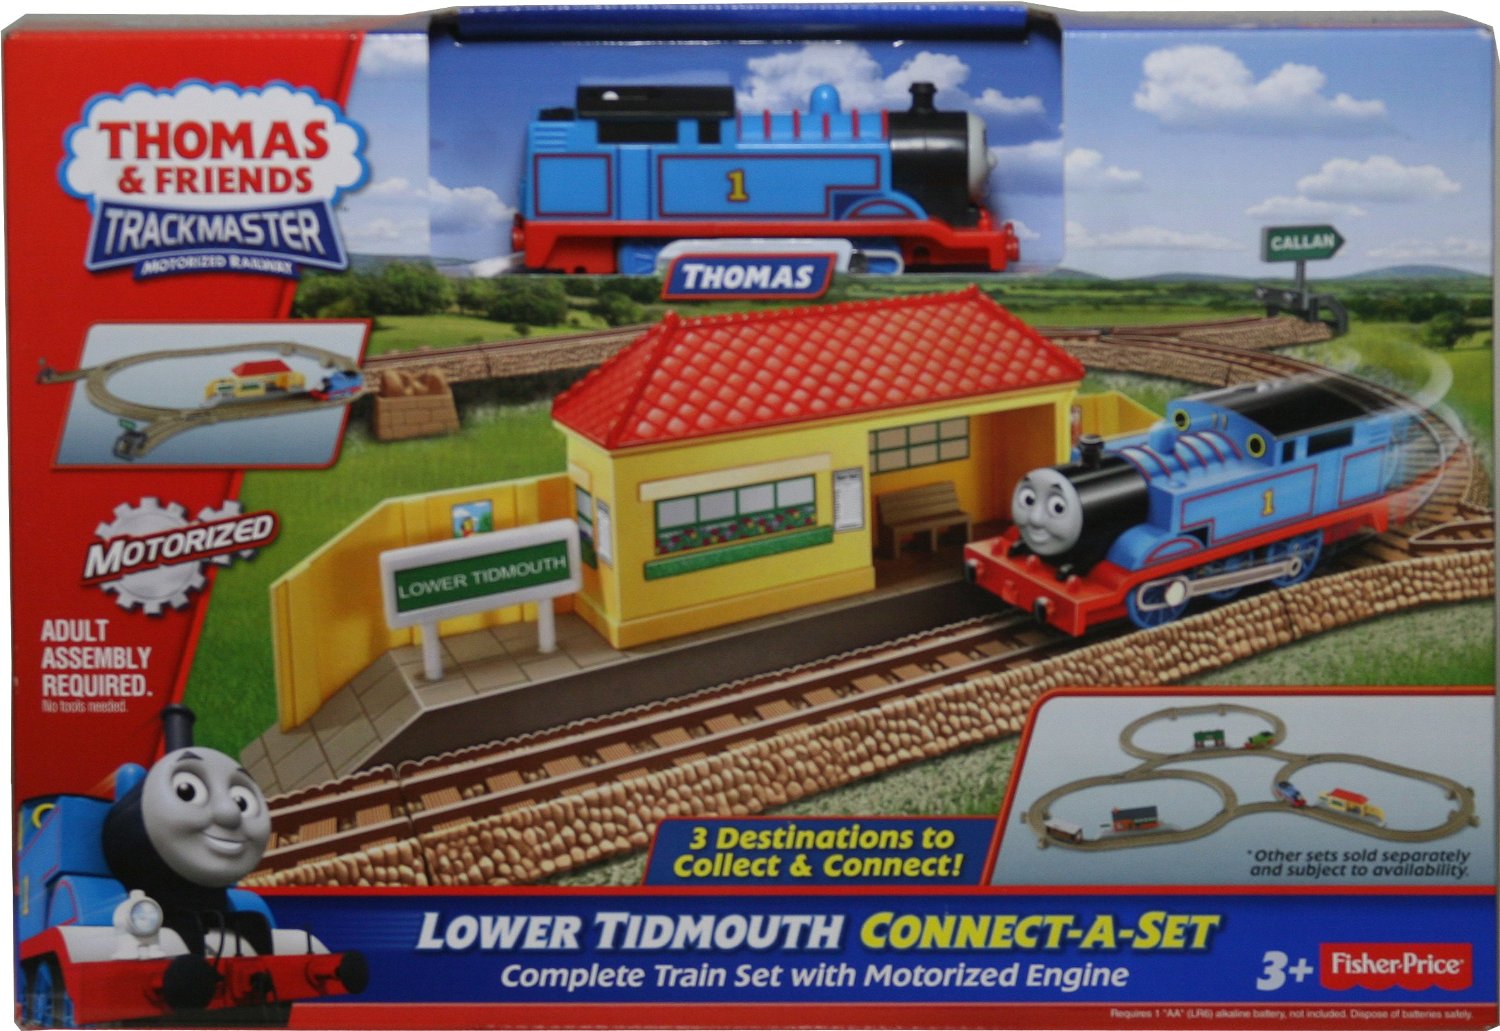 Lower Tidmouth Connect-A-Set | Thomas and Friends TrackMaster Wiki | FANDOM powered by ...1500 x 1031